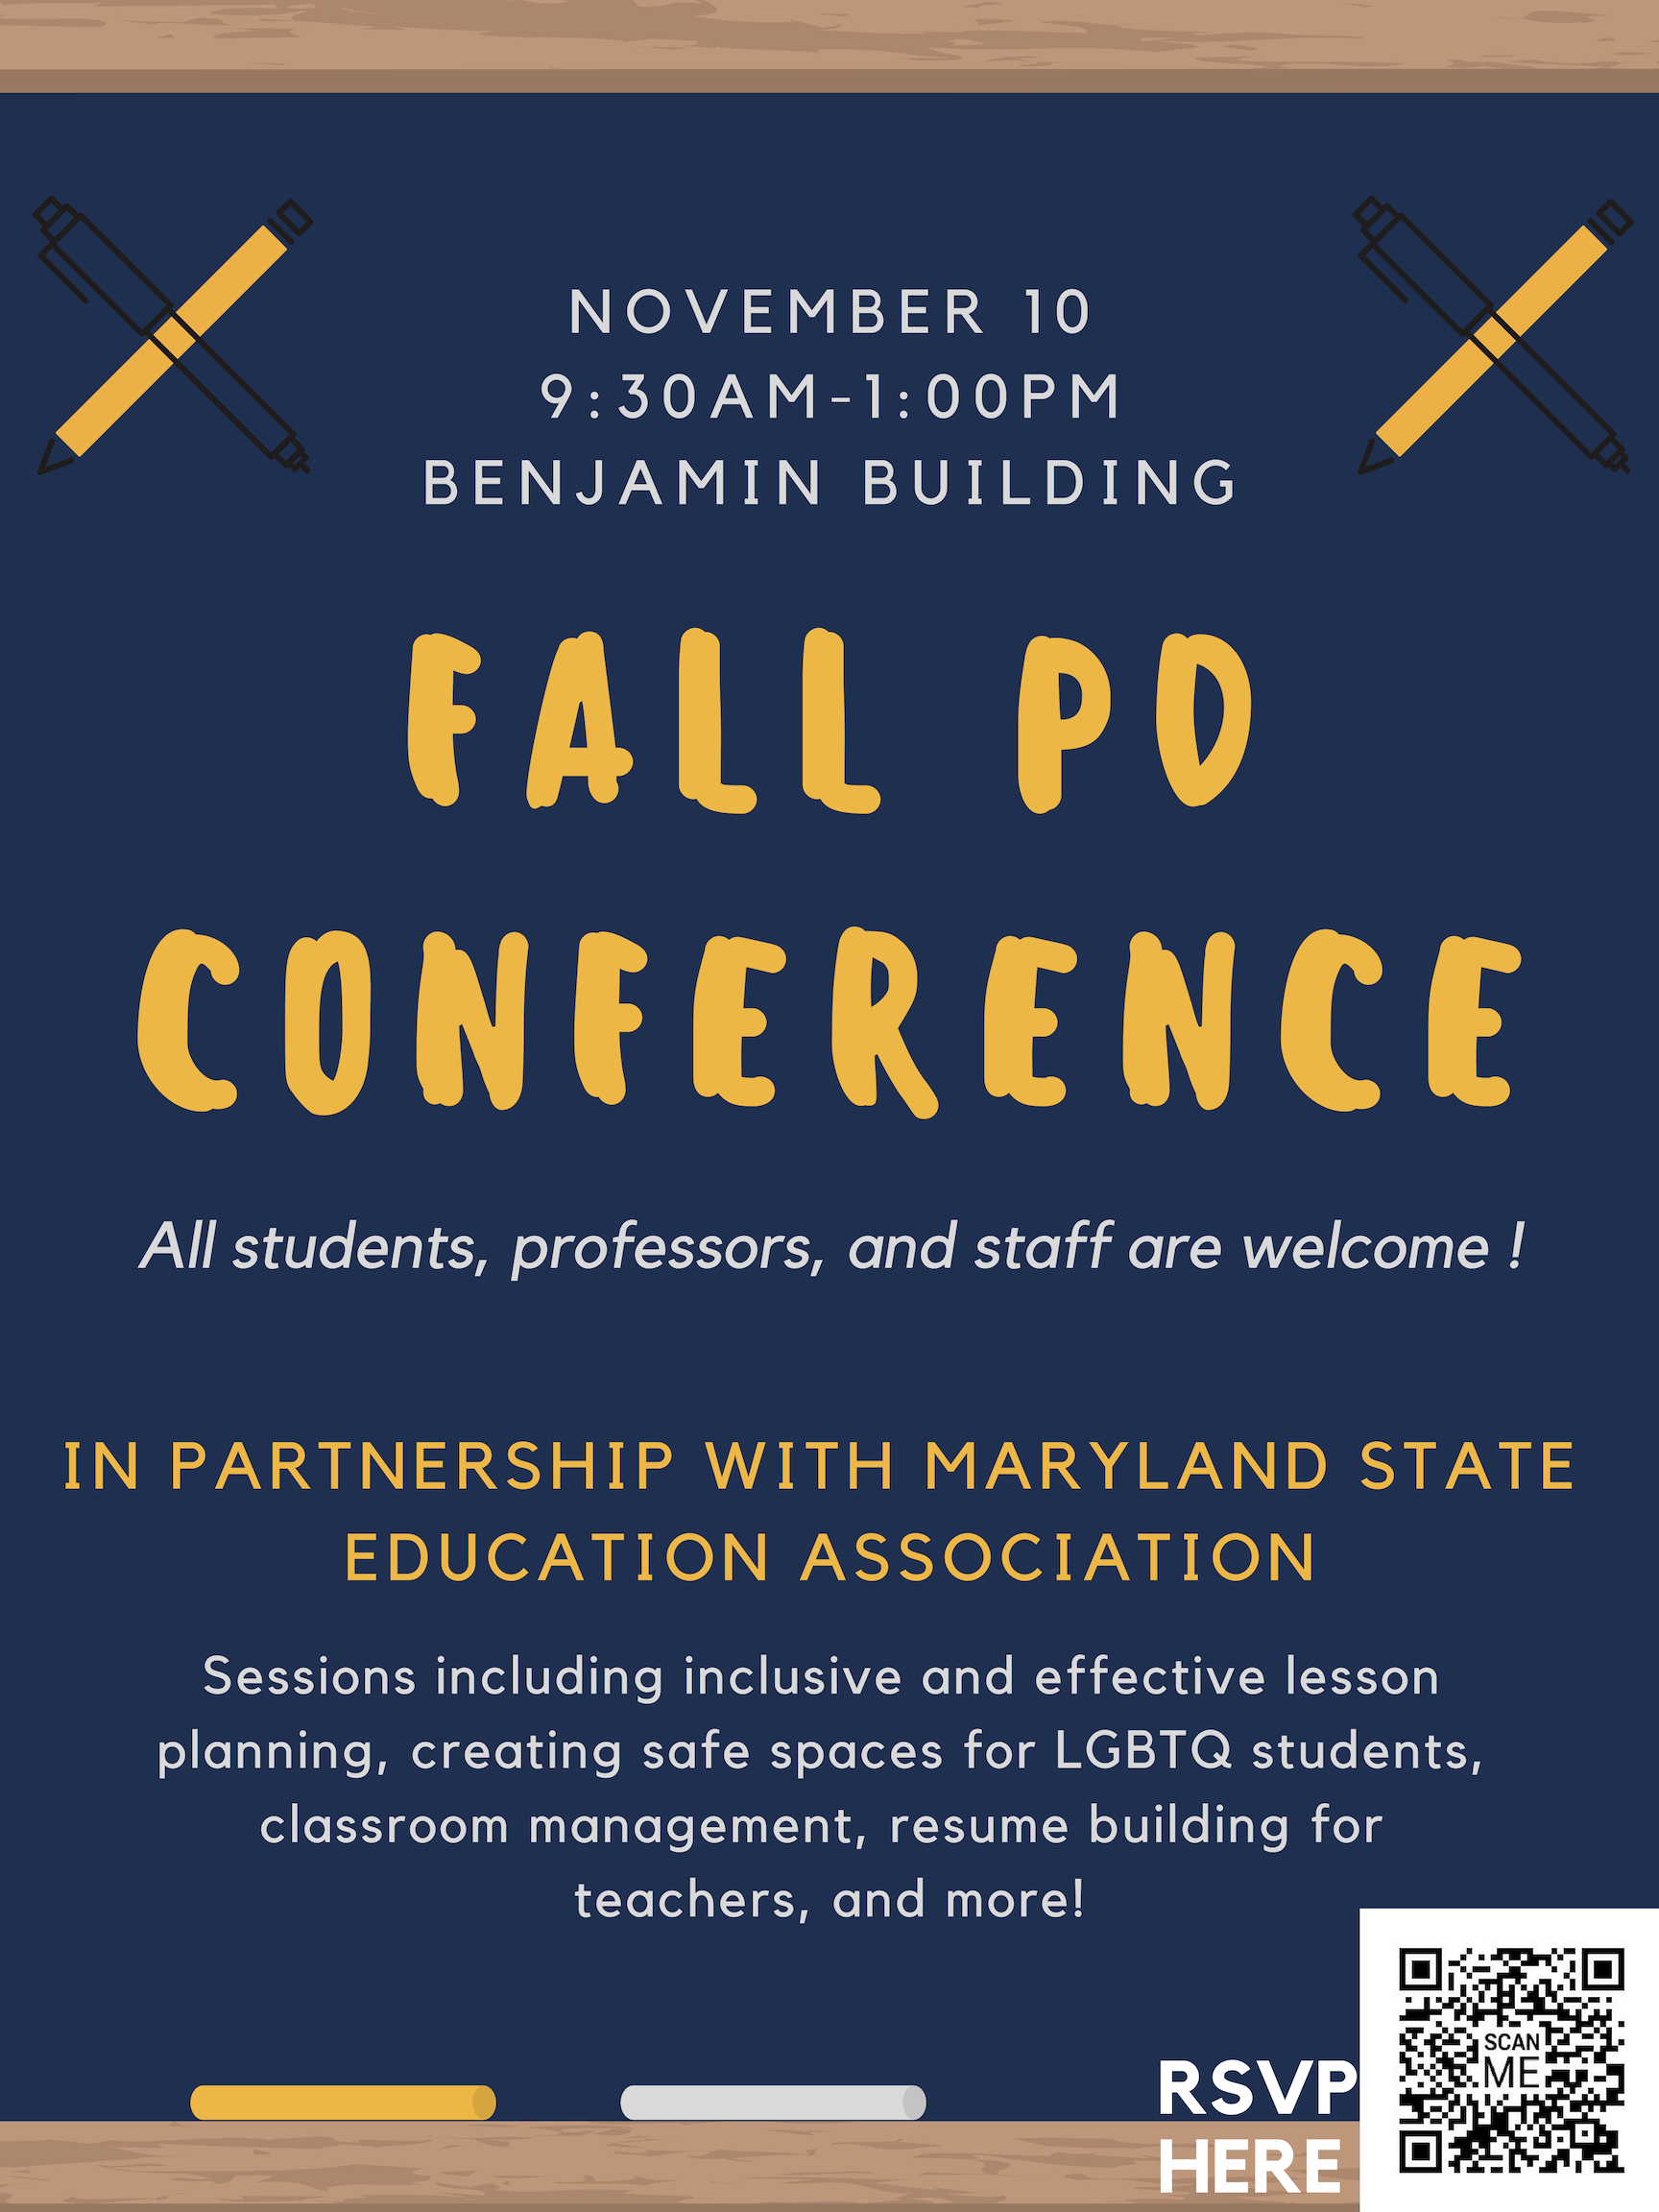 Fall PD Conference